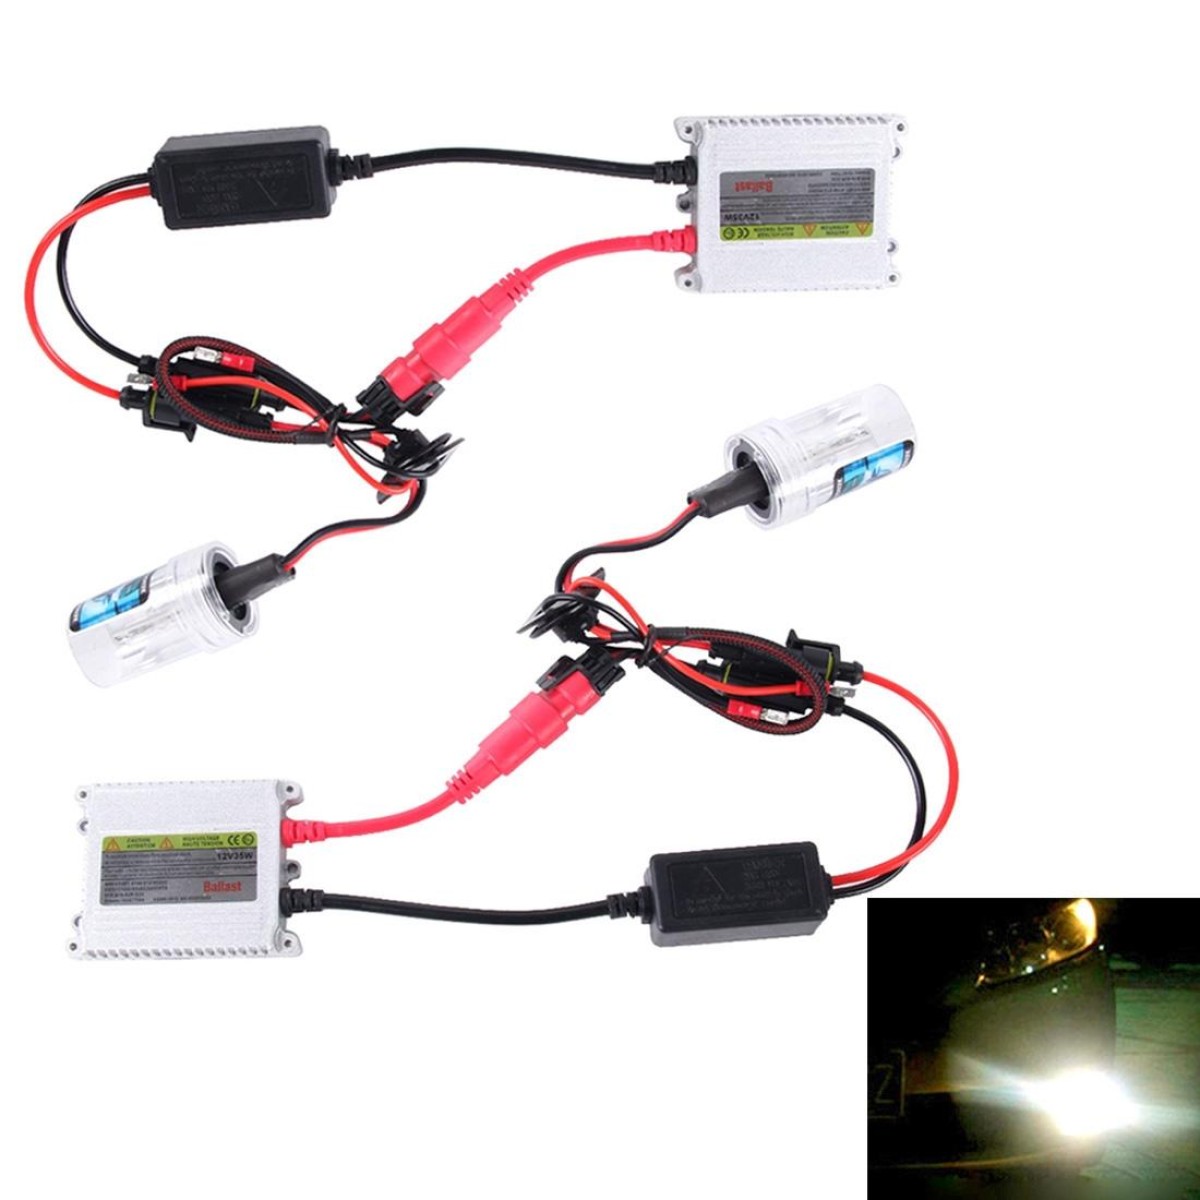 DC12V 35W 2x H11 Slim HID Xenon Light, High Intensity Discharge Lamp, Color Temperature: 8000K